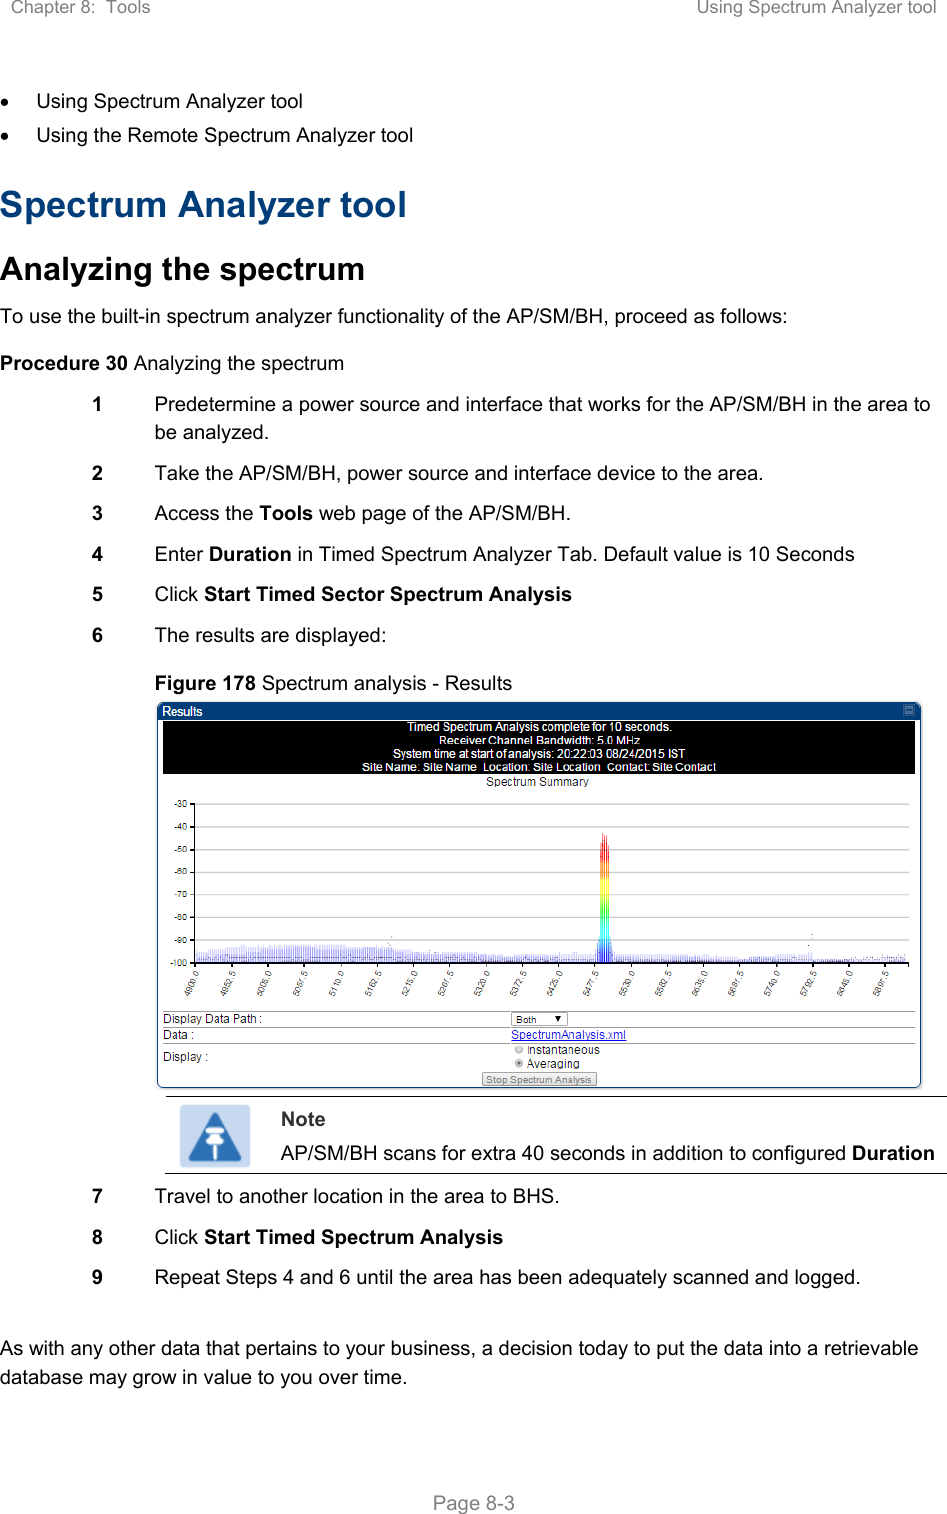 Chapter 8:  Tools  Using Spectrum Analyzer tool   Page 8-3   Using Spectrum Analyzer tool   Using the Remote Spectrum Analyzer tool Spectrum Analyzer tool Analyzing the spectrum To use the built-in spectrum analyzer functionality of the AP/SM/BH, proceed as follows: Procedure 30 Analyzing the spectrum 1  Predetermine a power source and interface that works for the AP/SM/BH in the area to be analyzed. 2  Take the AP/SM/BH, power source and interface device to the area. 3  Access the Tools web page of the AP/SM/BH. 4  Enter Duration in Timed Spectrum Analyzer Tab. Default value is 10 Seconds 5  Click Start Timed Sector Spectrum Analysis 6  The results are displayed: Figure 178 Spectrum analysis - Results   Note AP/SM/BH scans for extra 40 seconds in addition to configured Duration  7  Travel to another location in the area to BHS. 8  Click Start Timed Spectrum Analysis 9  Repeat Steps 4 and 6 until the area has been adequately scanned and logged.  As with any other data that pertains to your business, a decision today to put the data into a retrievable database may grow in value to you over time.  